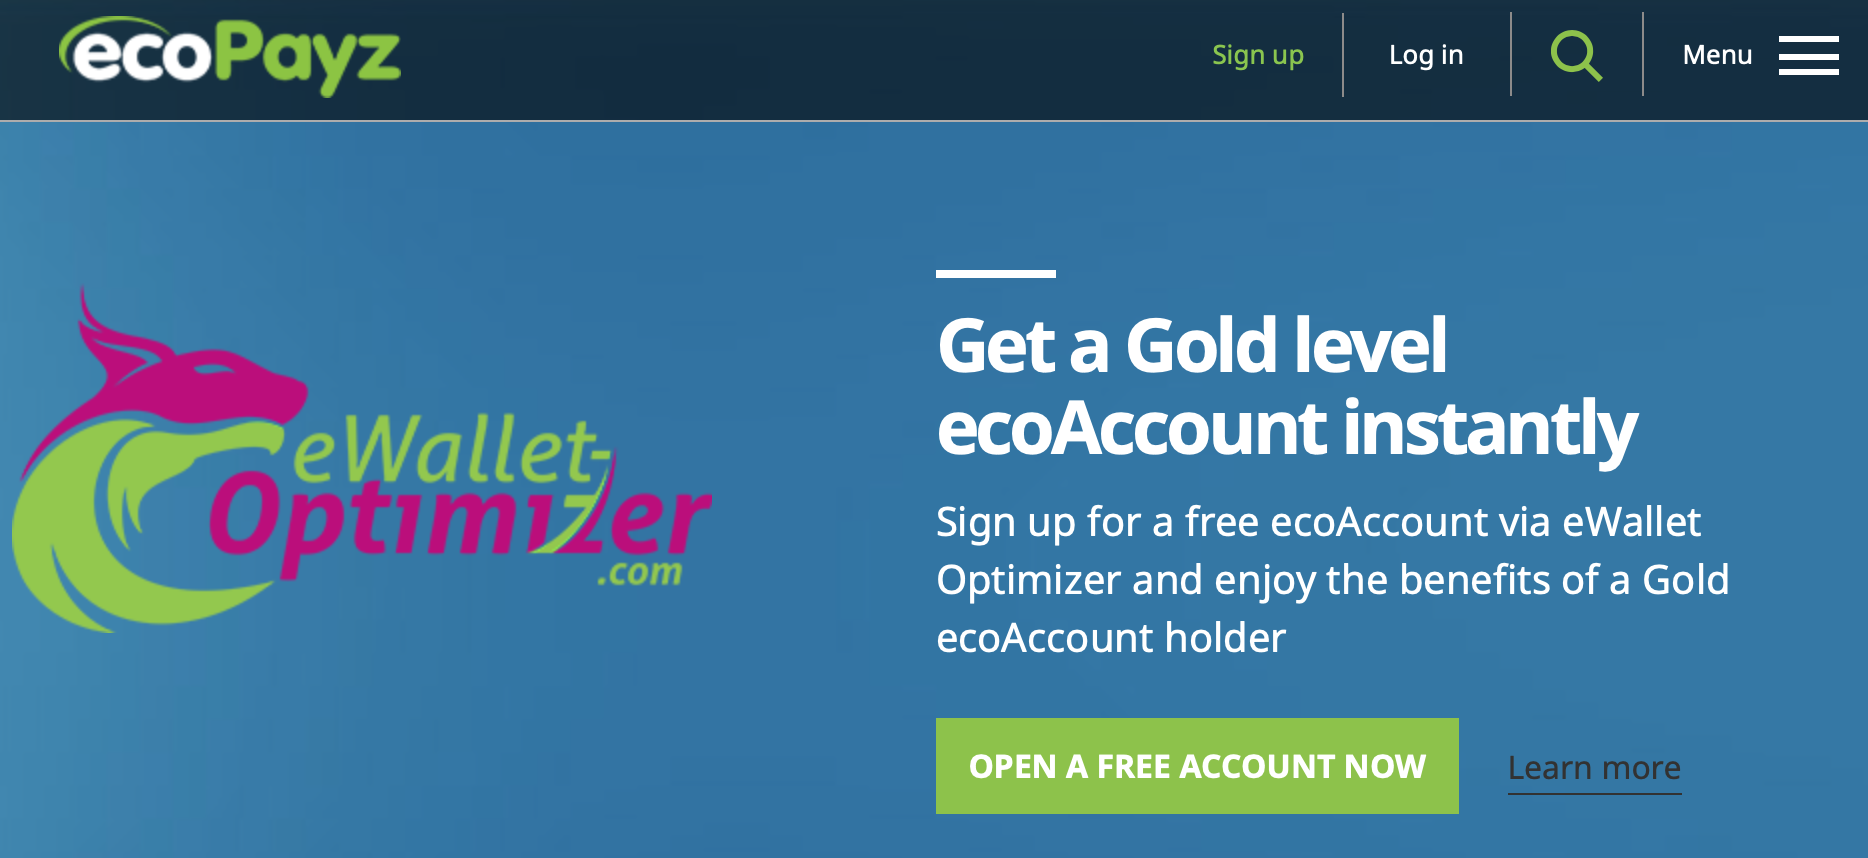 ecoPayz Review Banner